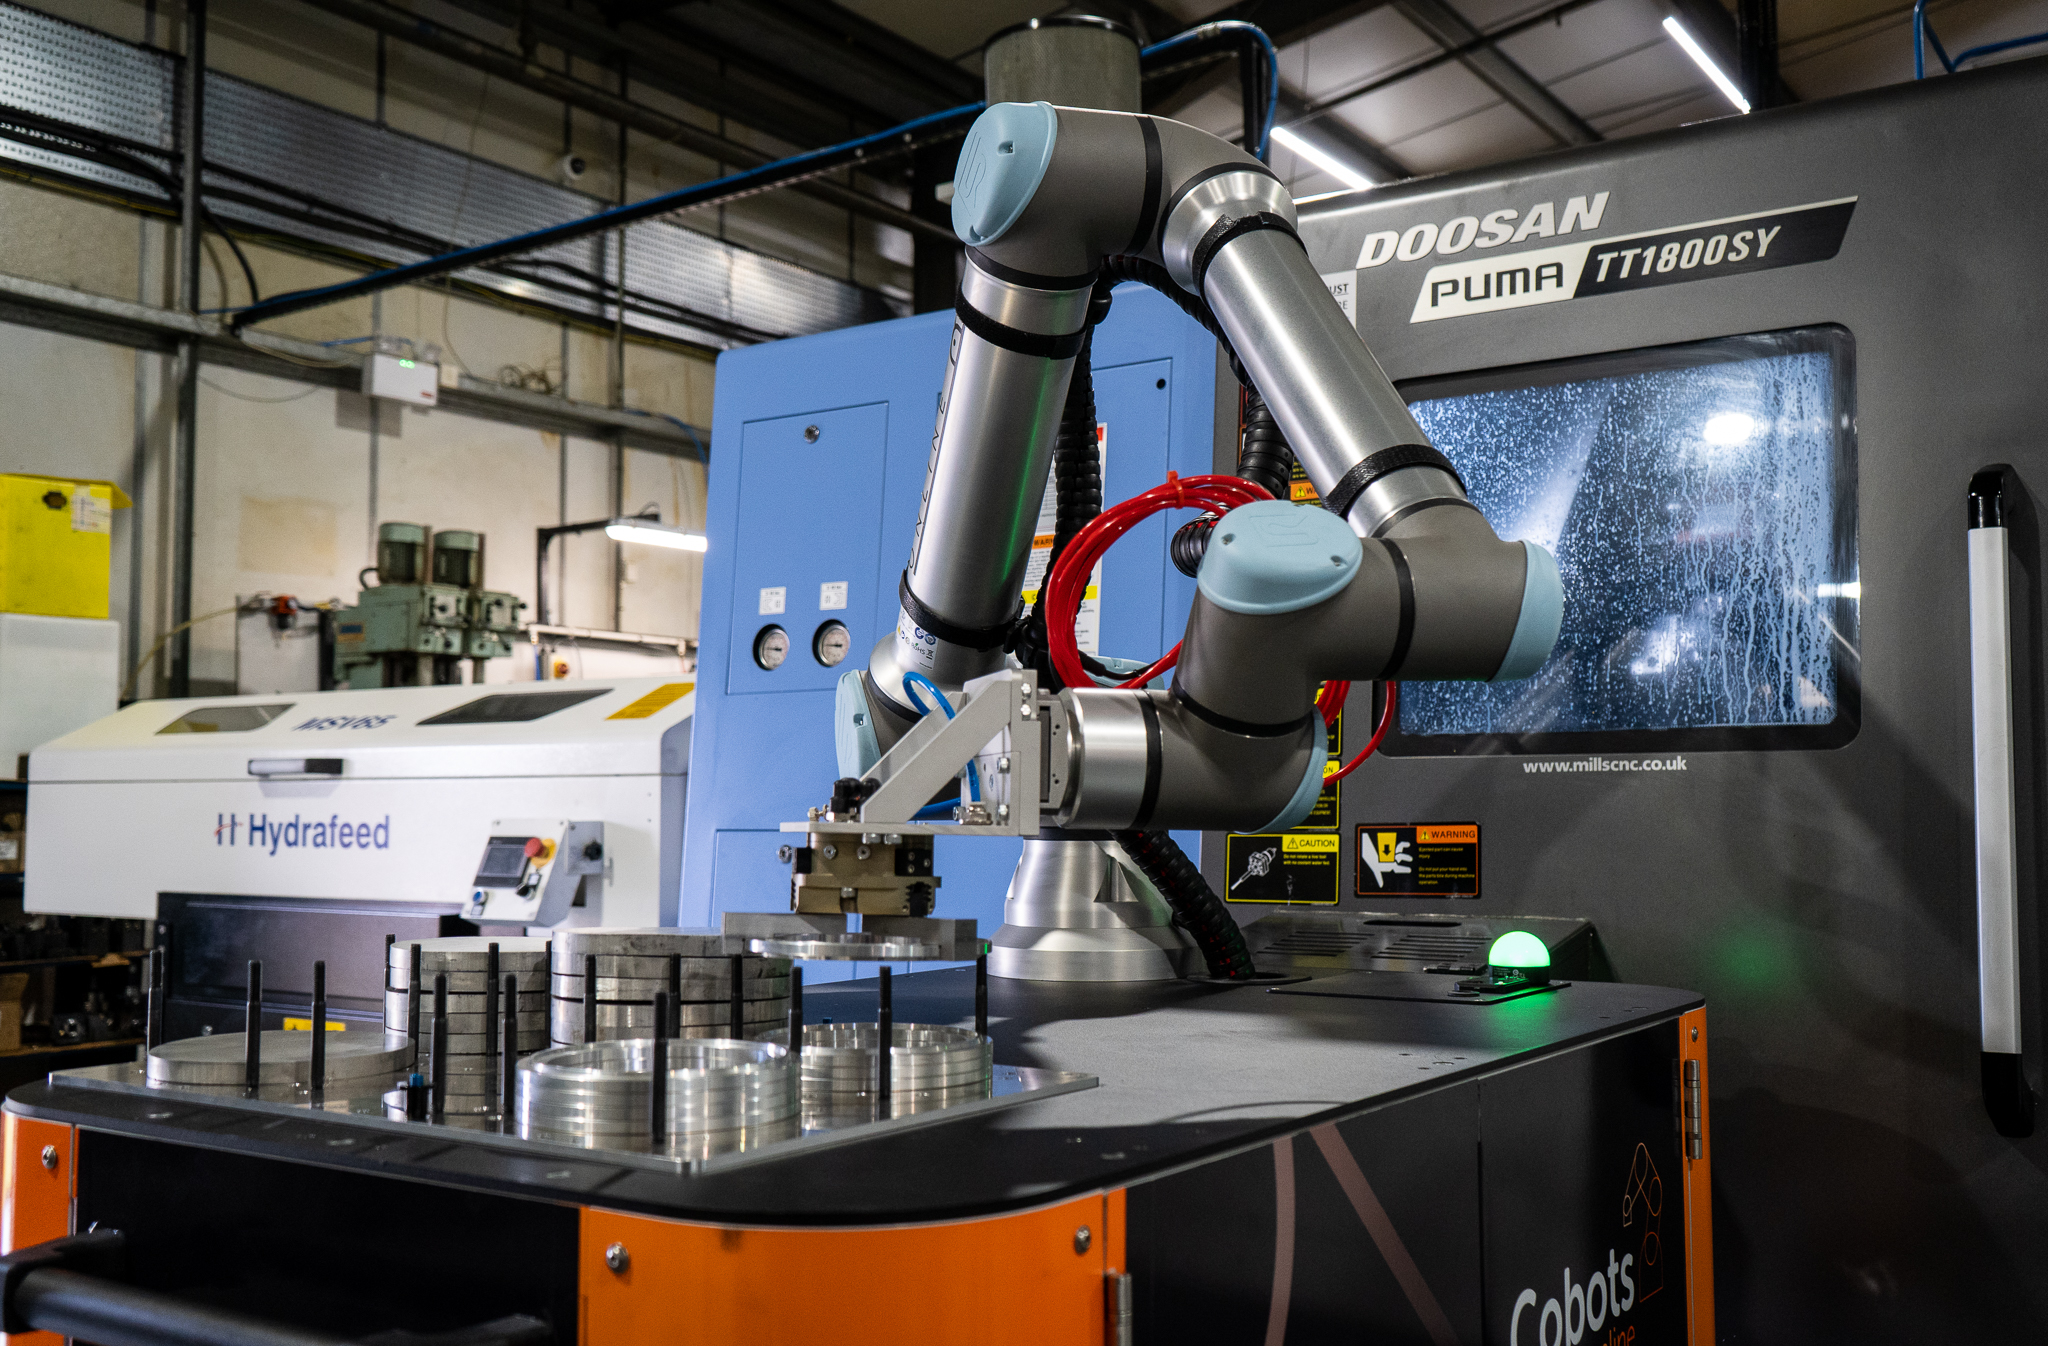 CoboTend and Universal Robots providing light-out manufacturing on Doosan machine